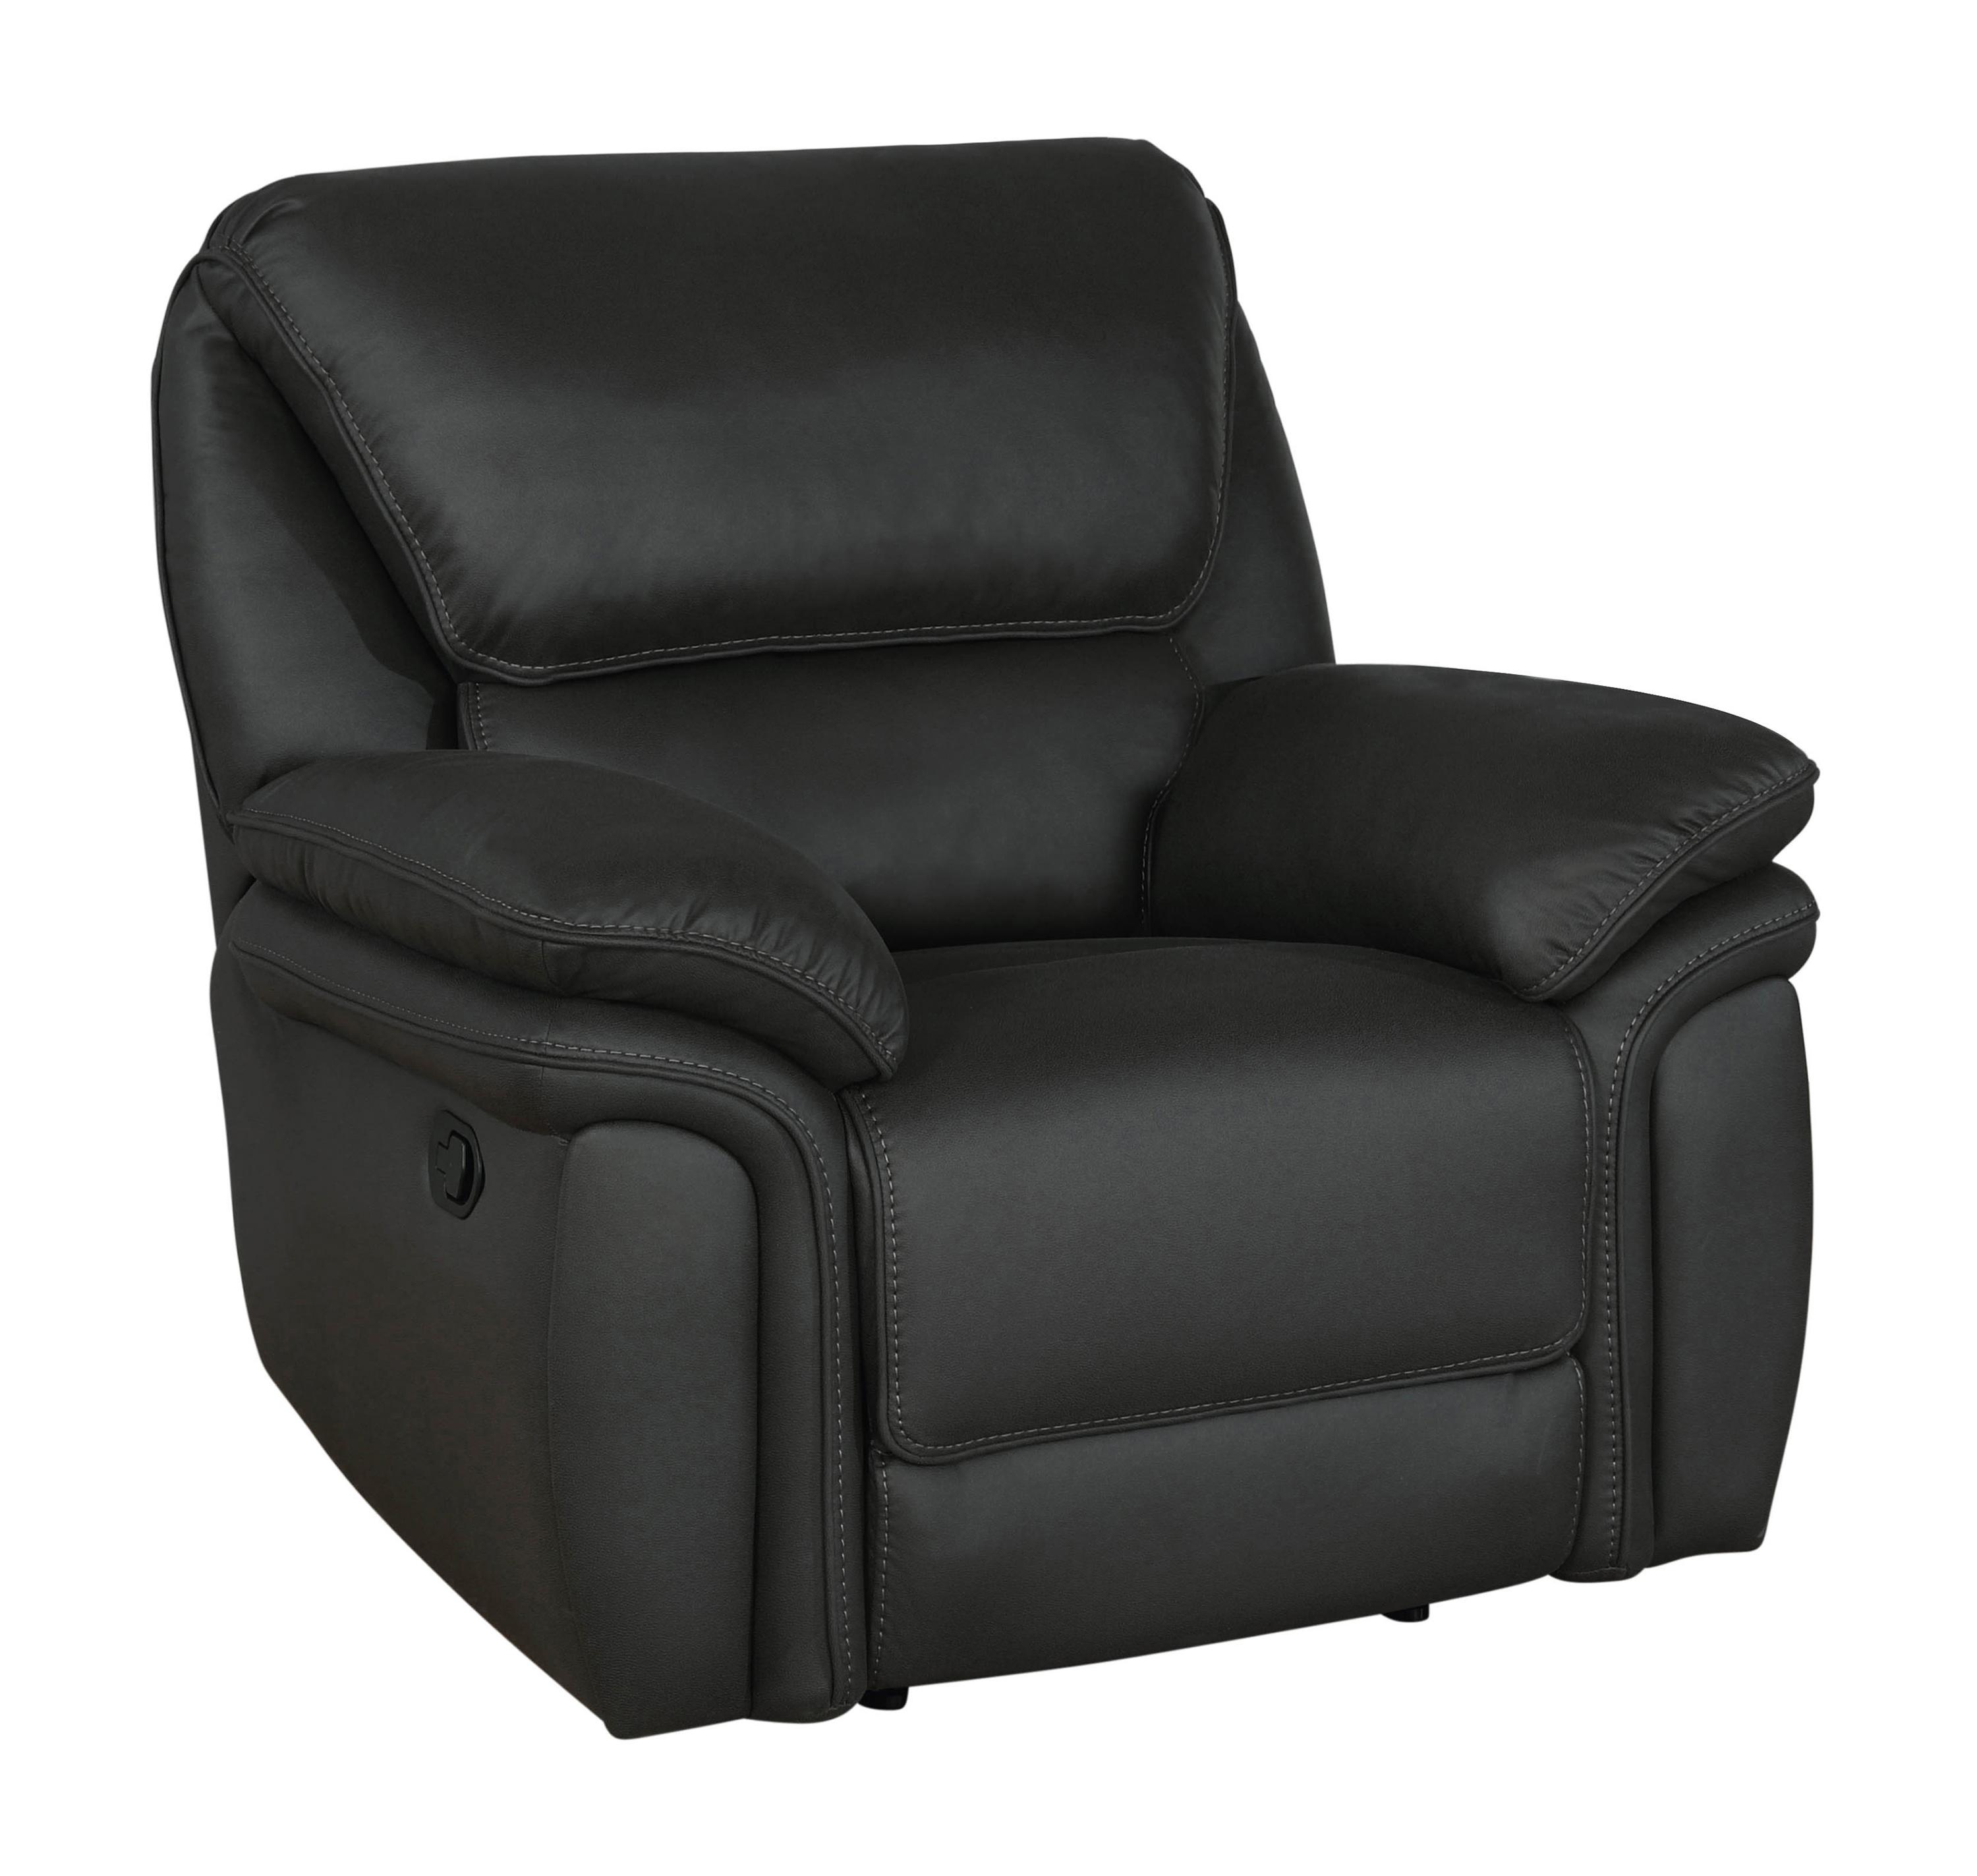 Transitional Recliner 651346 Breton 651346 in Charcoal 